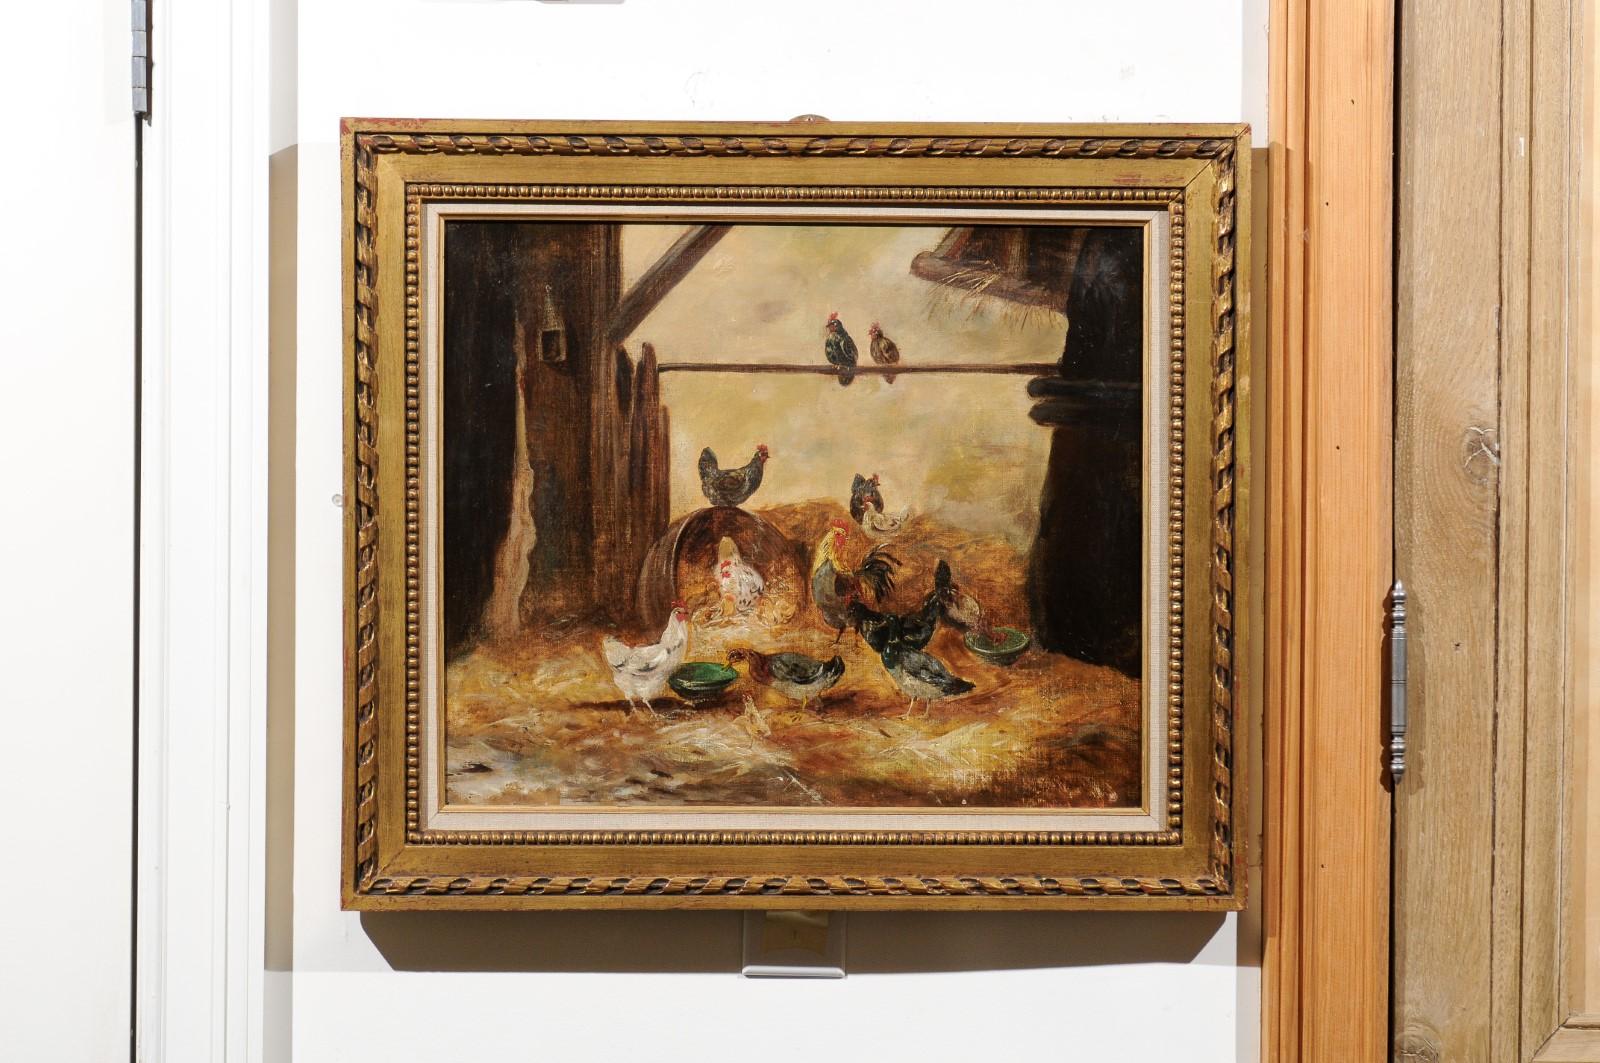 Unknown Framed 19th Century Oil on Canvas Barn Painting with Rooster, Hens and Chicks For Sale